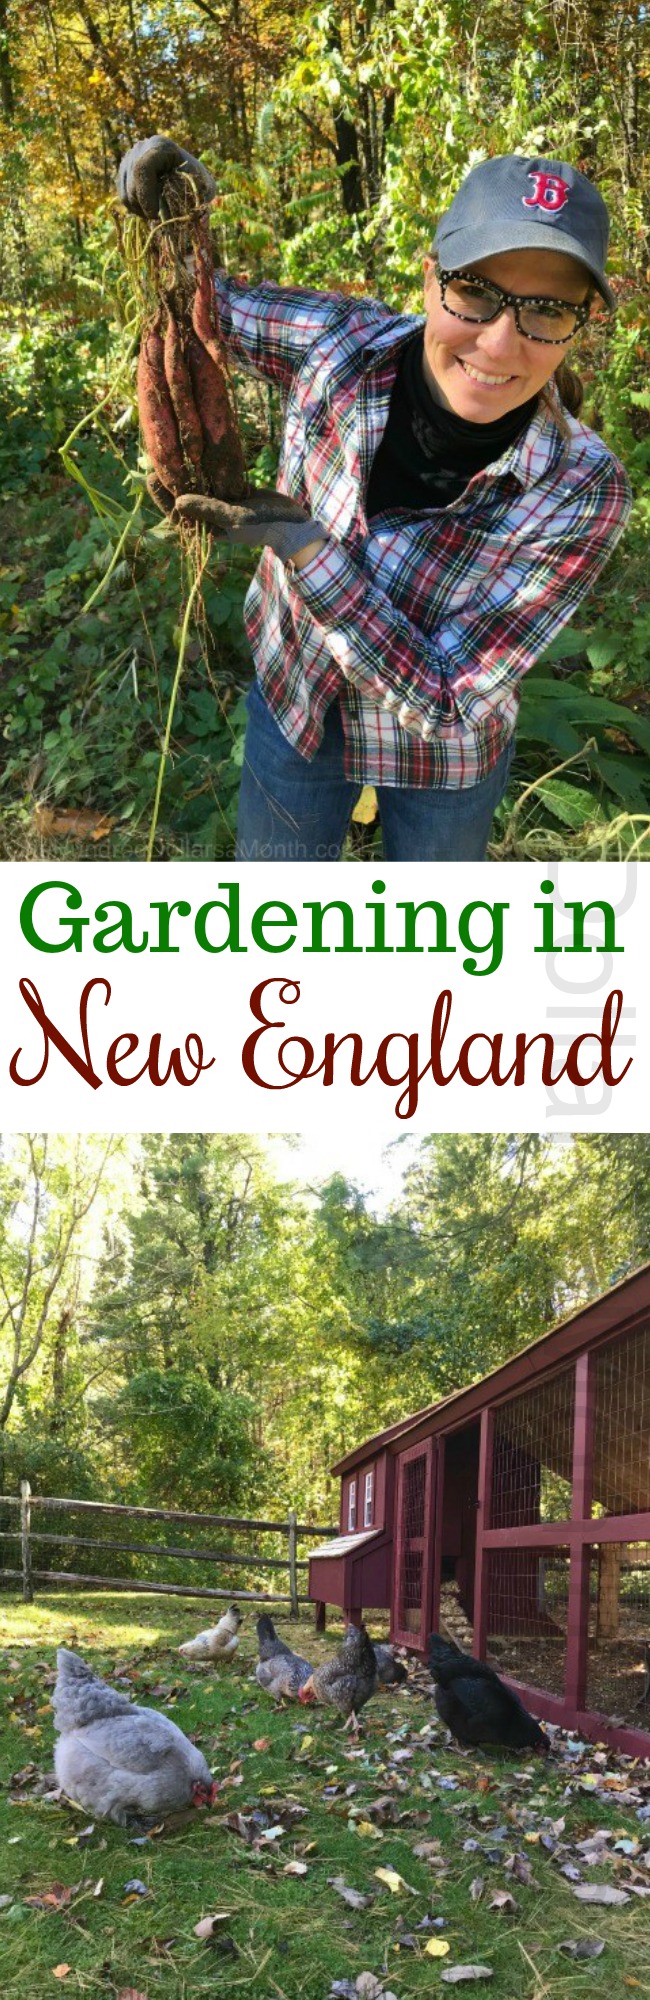 Gardening in New England – The Final Harvest of the Year